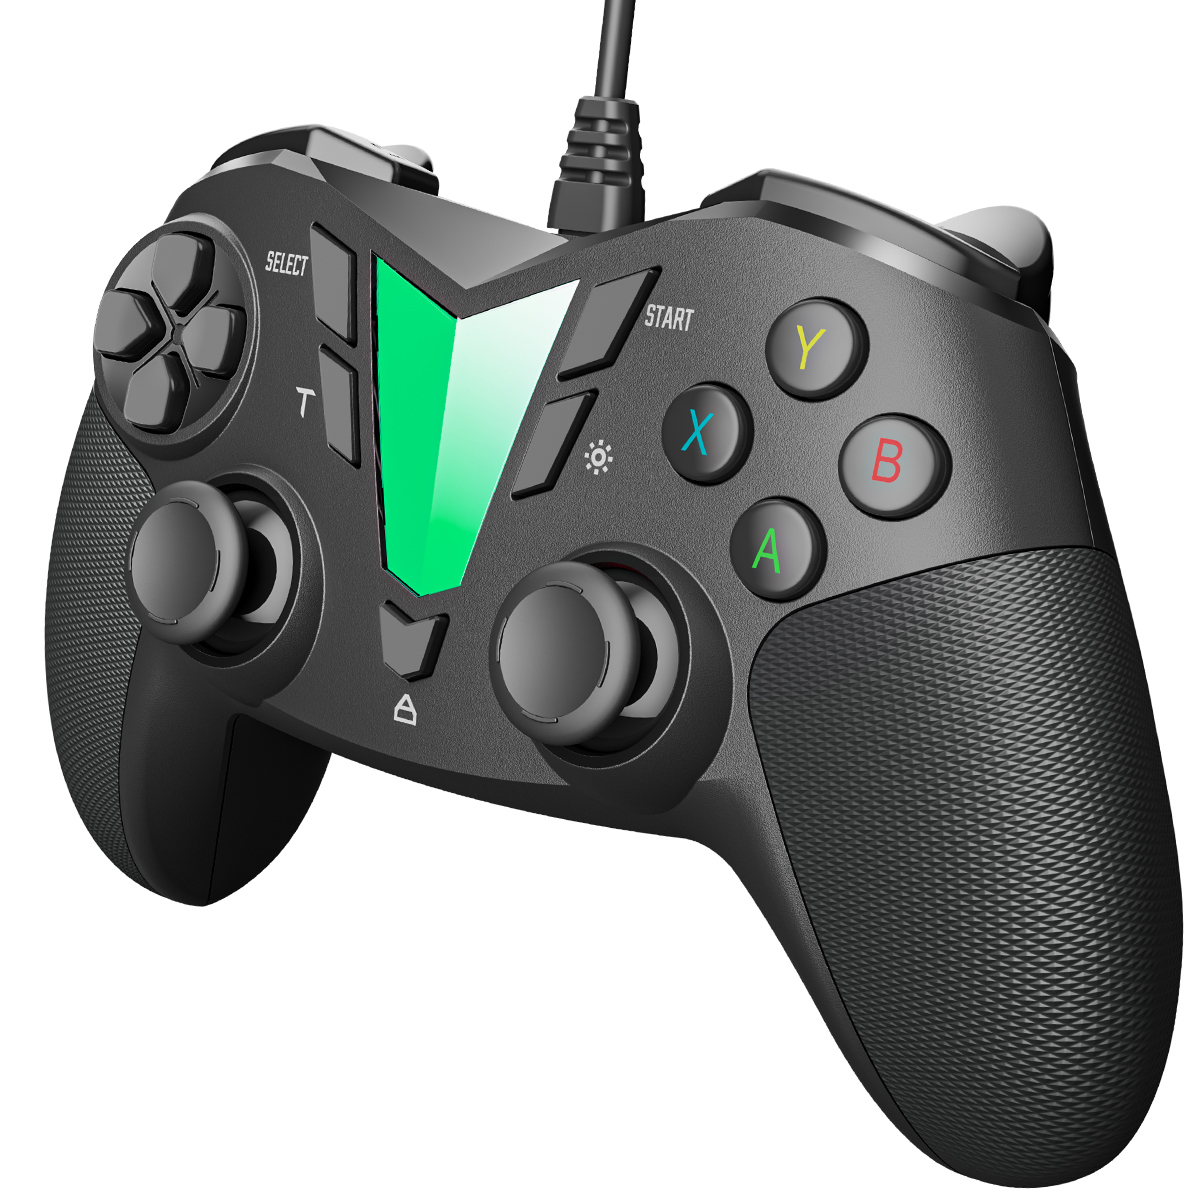 IFYOO ONE Pro Wired Gaming Controller – Black – IFYOO Brand Official Website